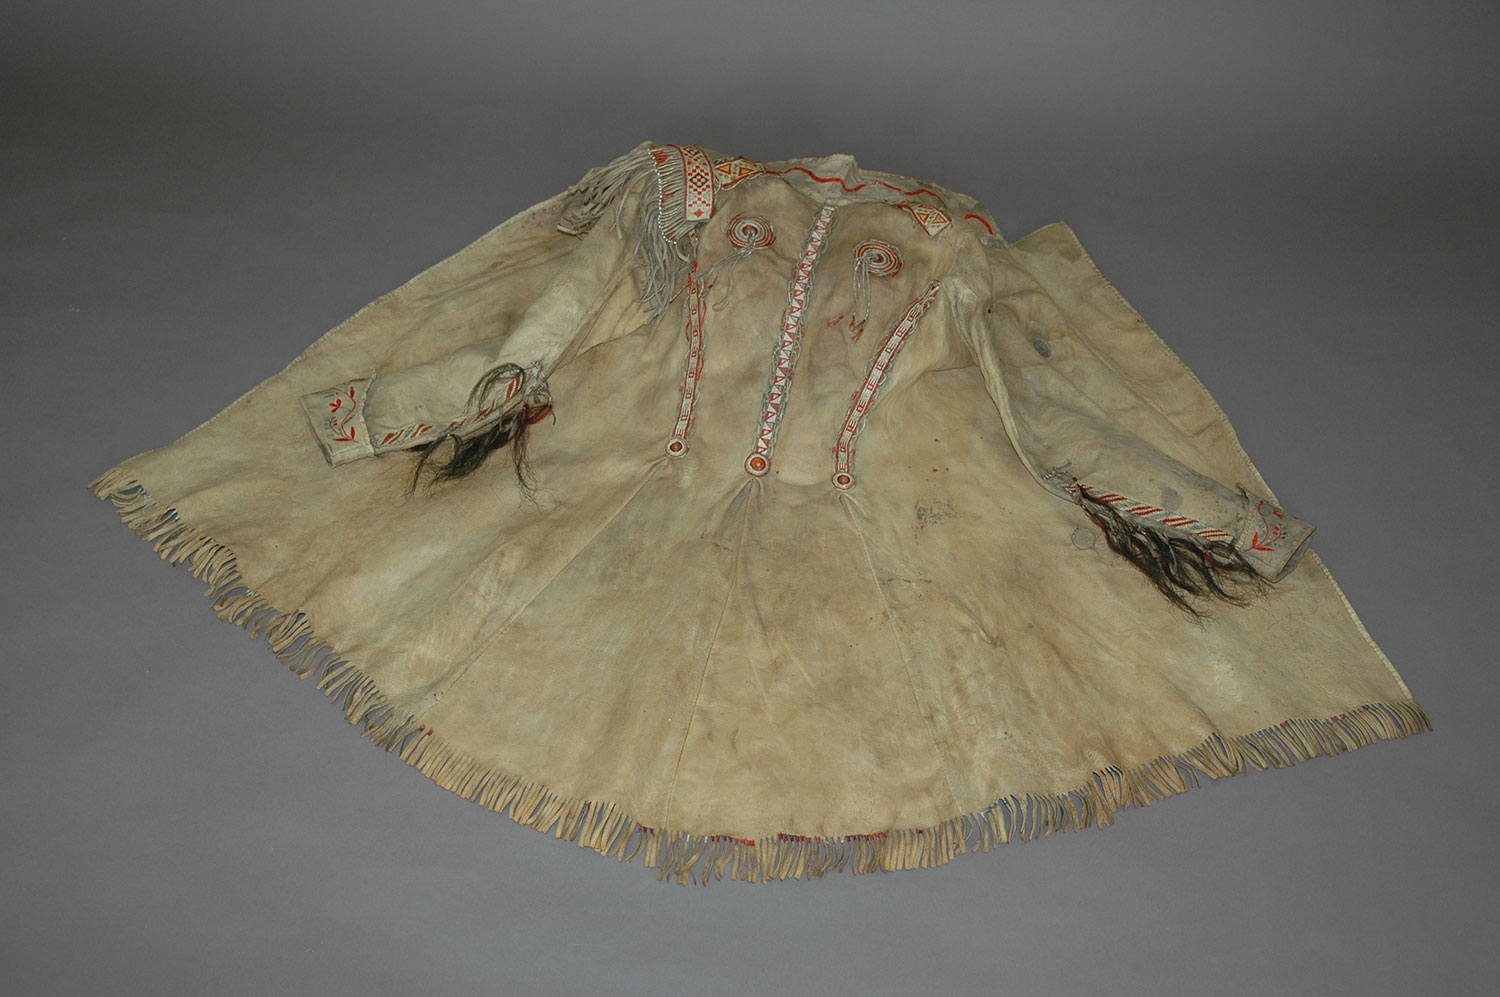 Tailored moose skin coat with multi-coloured geometric and floral quillwork presented by Captain Hampden Clement Blamire Moody who served in Canada from 1840-1848, mainly at Fort Garry (Winnipeg), the Hudson’s Bay Company trading post. © Royal Engineers Museum, Library and Archive.